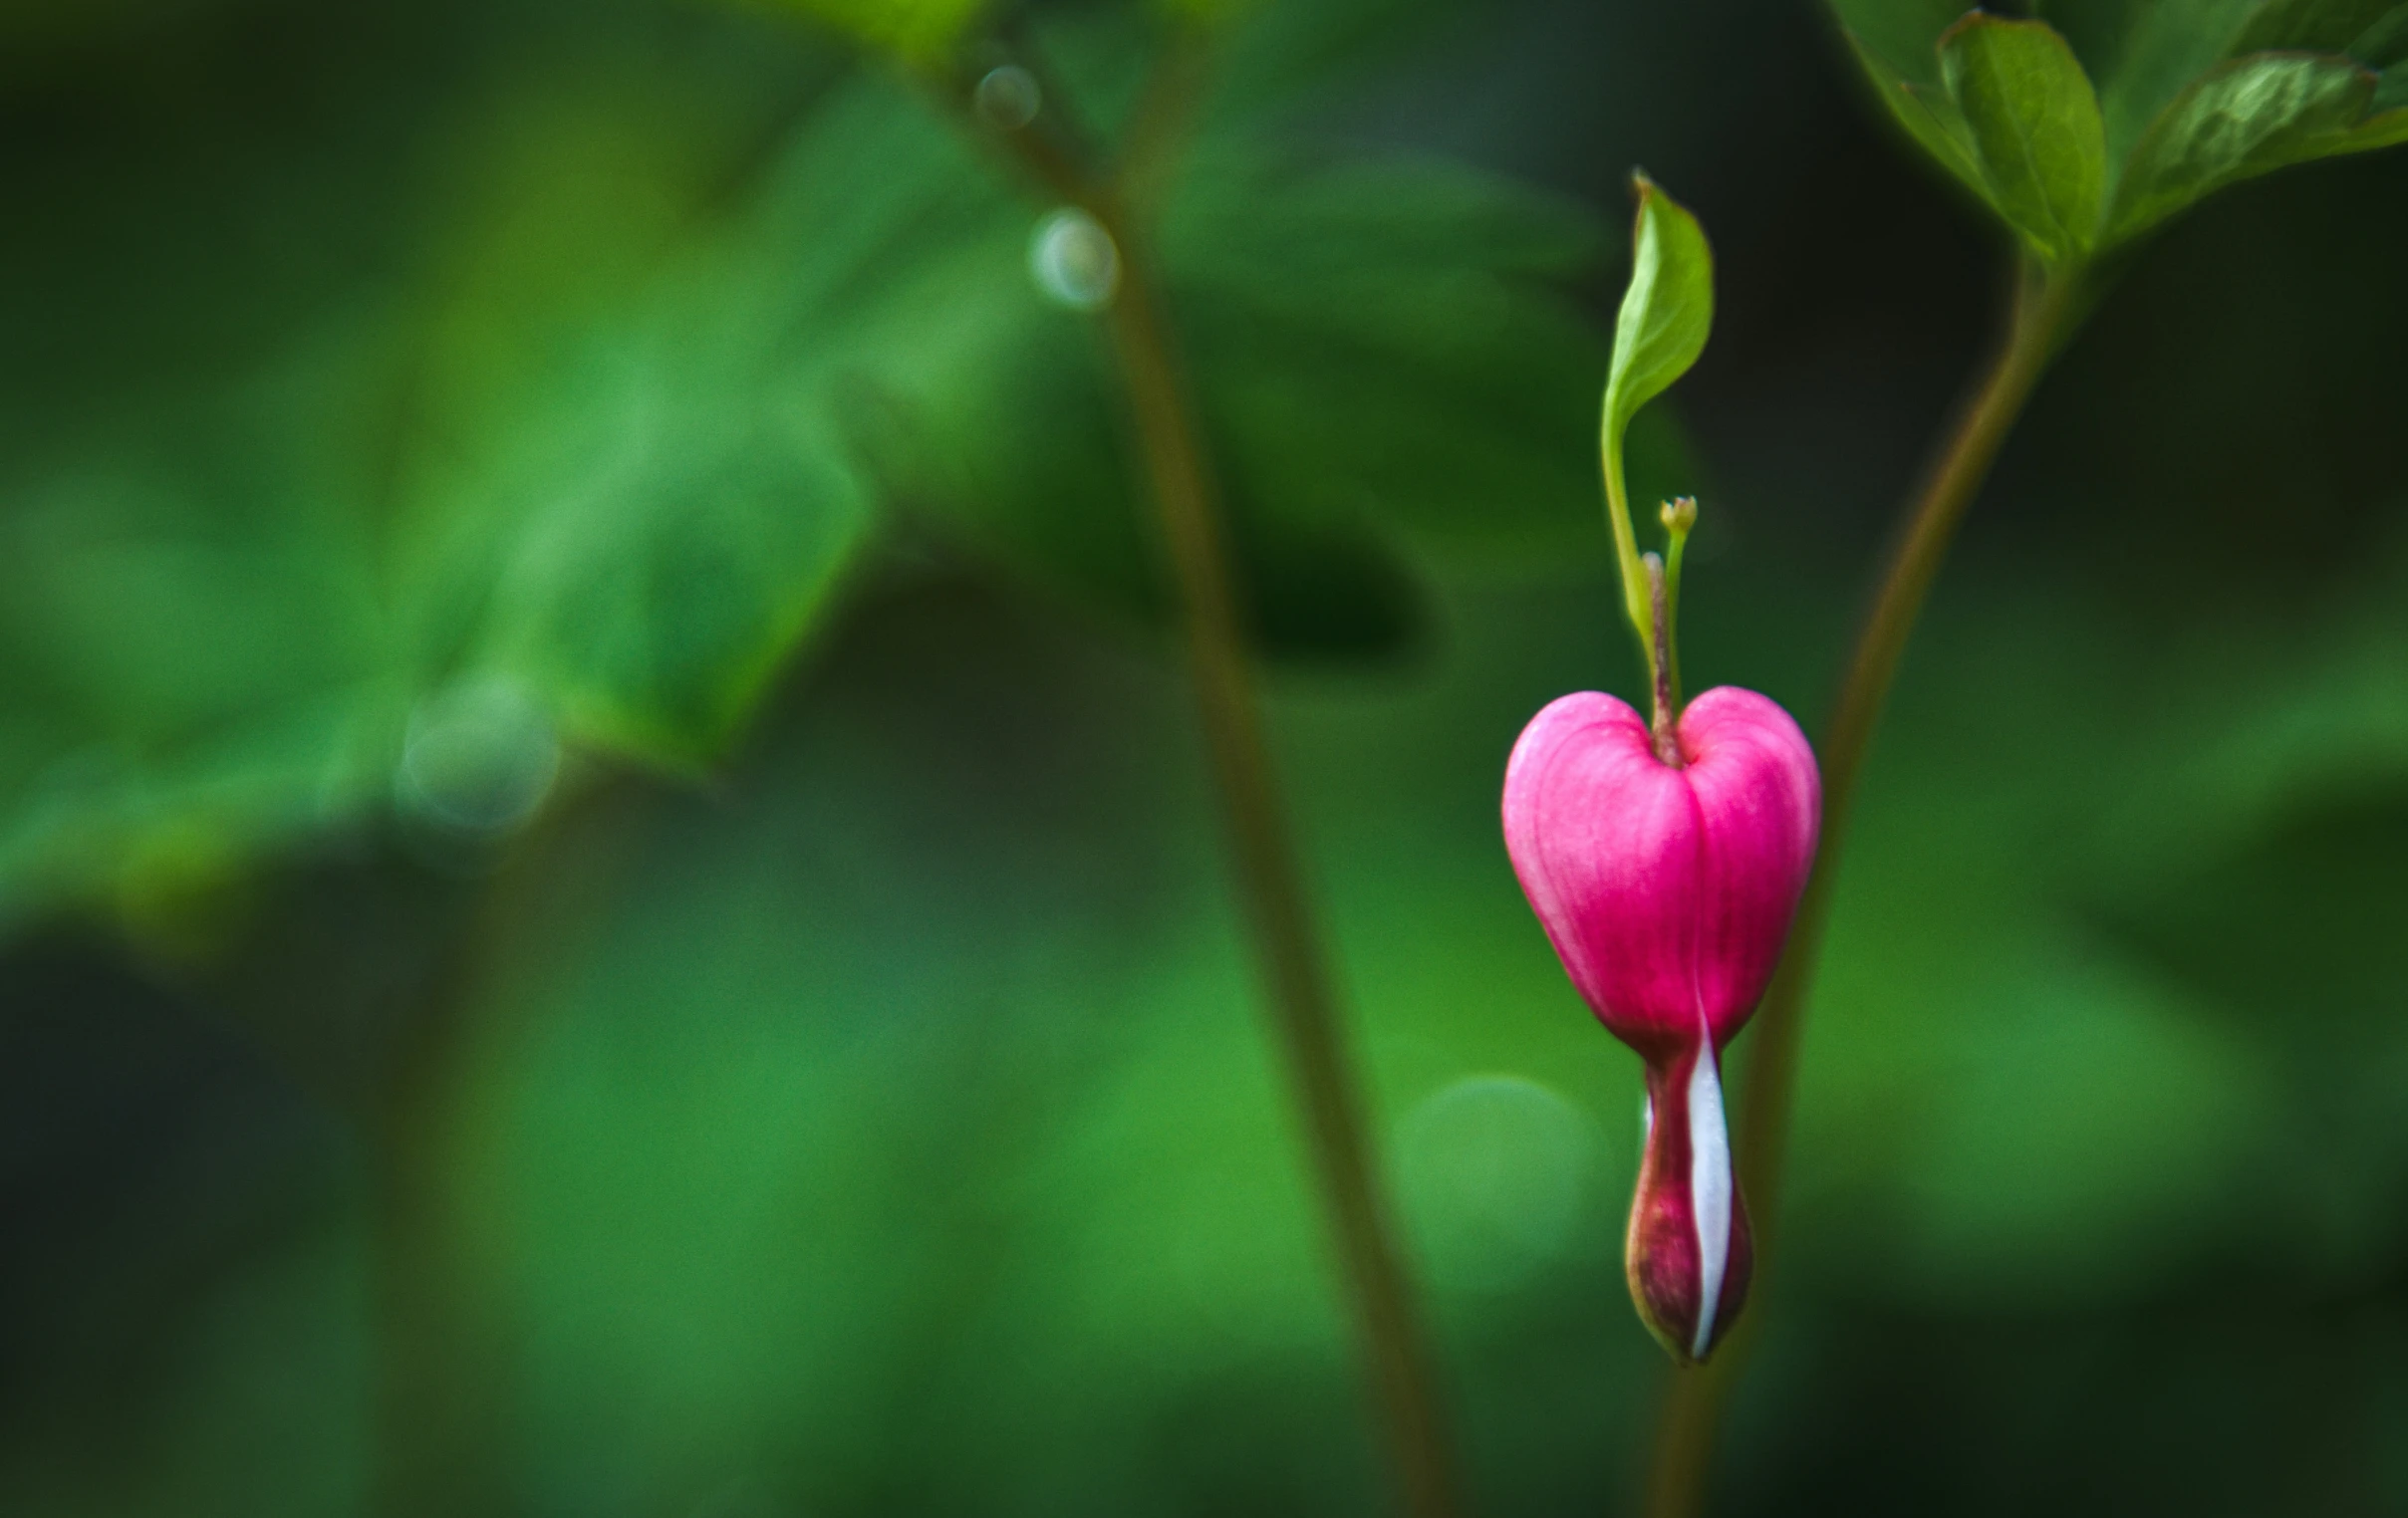 pink flower with a heart shaped bud on green leaves